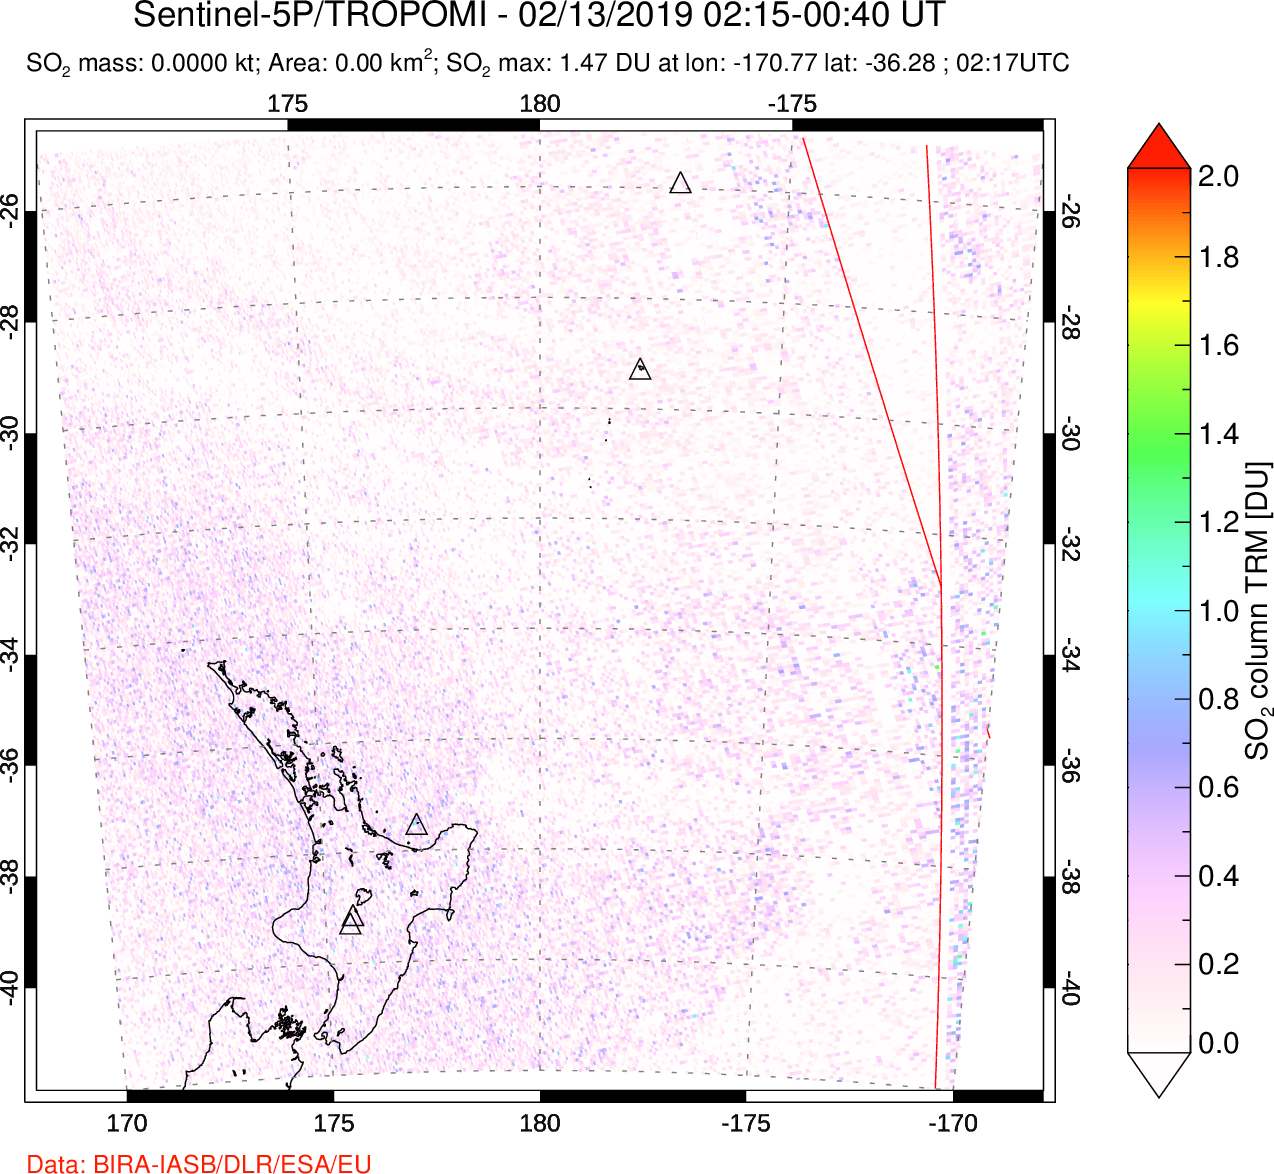 A sulfur dioxide image over New Zealand on Feb 13, 2019.